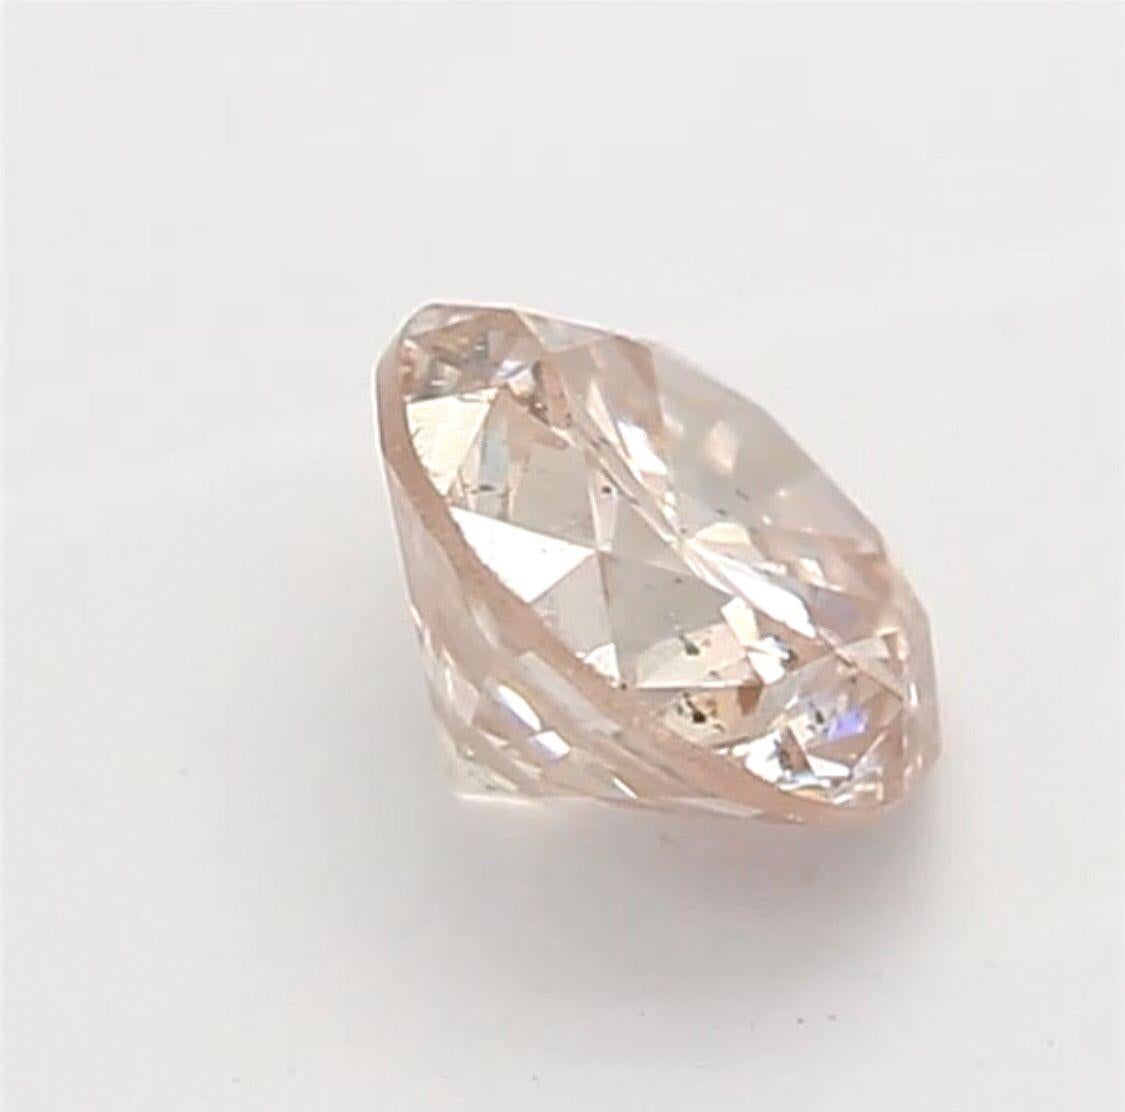 Round Cut 0.28 Carat Light Orangy Pink Round Shaped Diamond SI2 Clarity CGL Certified For Sale